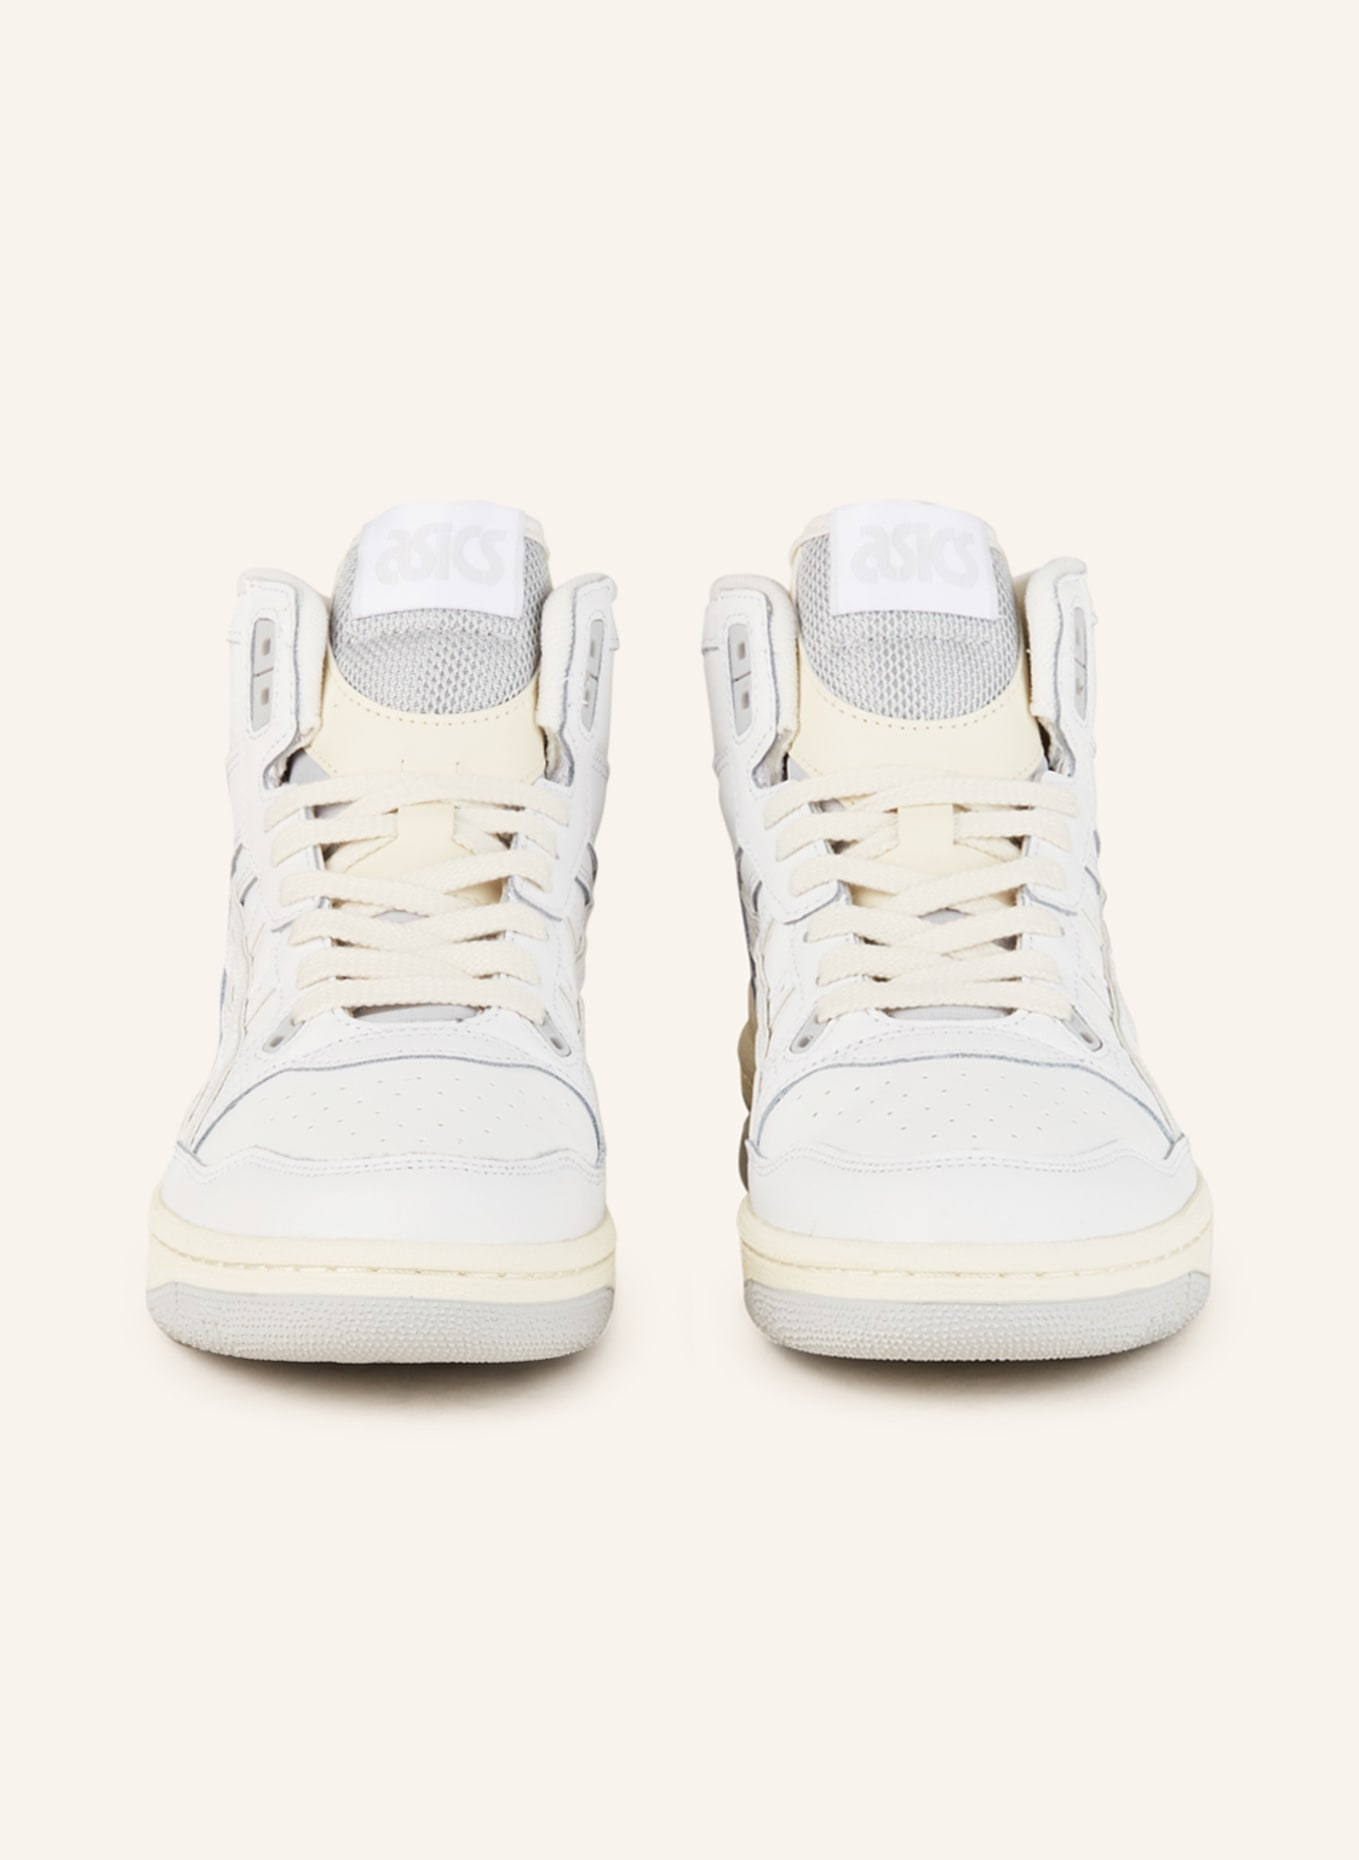 ASICS Hightop sneakers EX89 MT, Color: WHITE (Image 3)